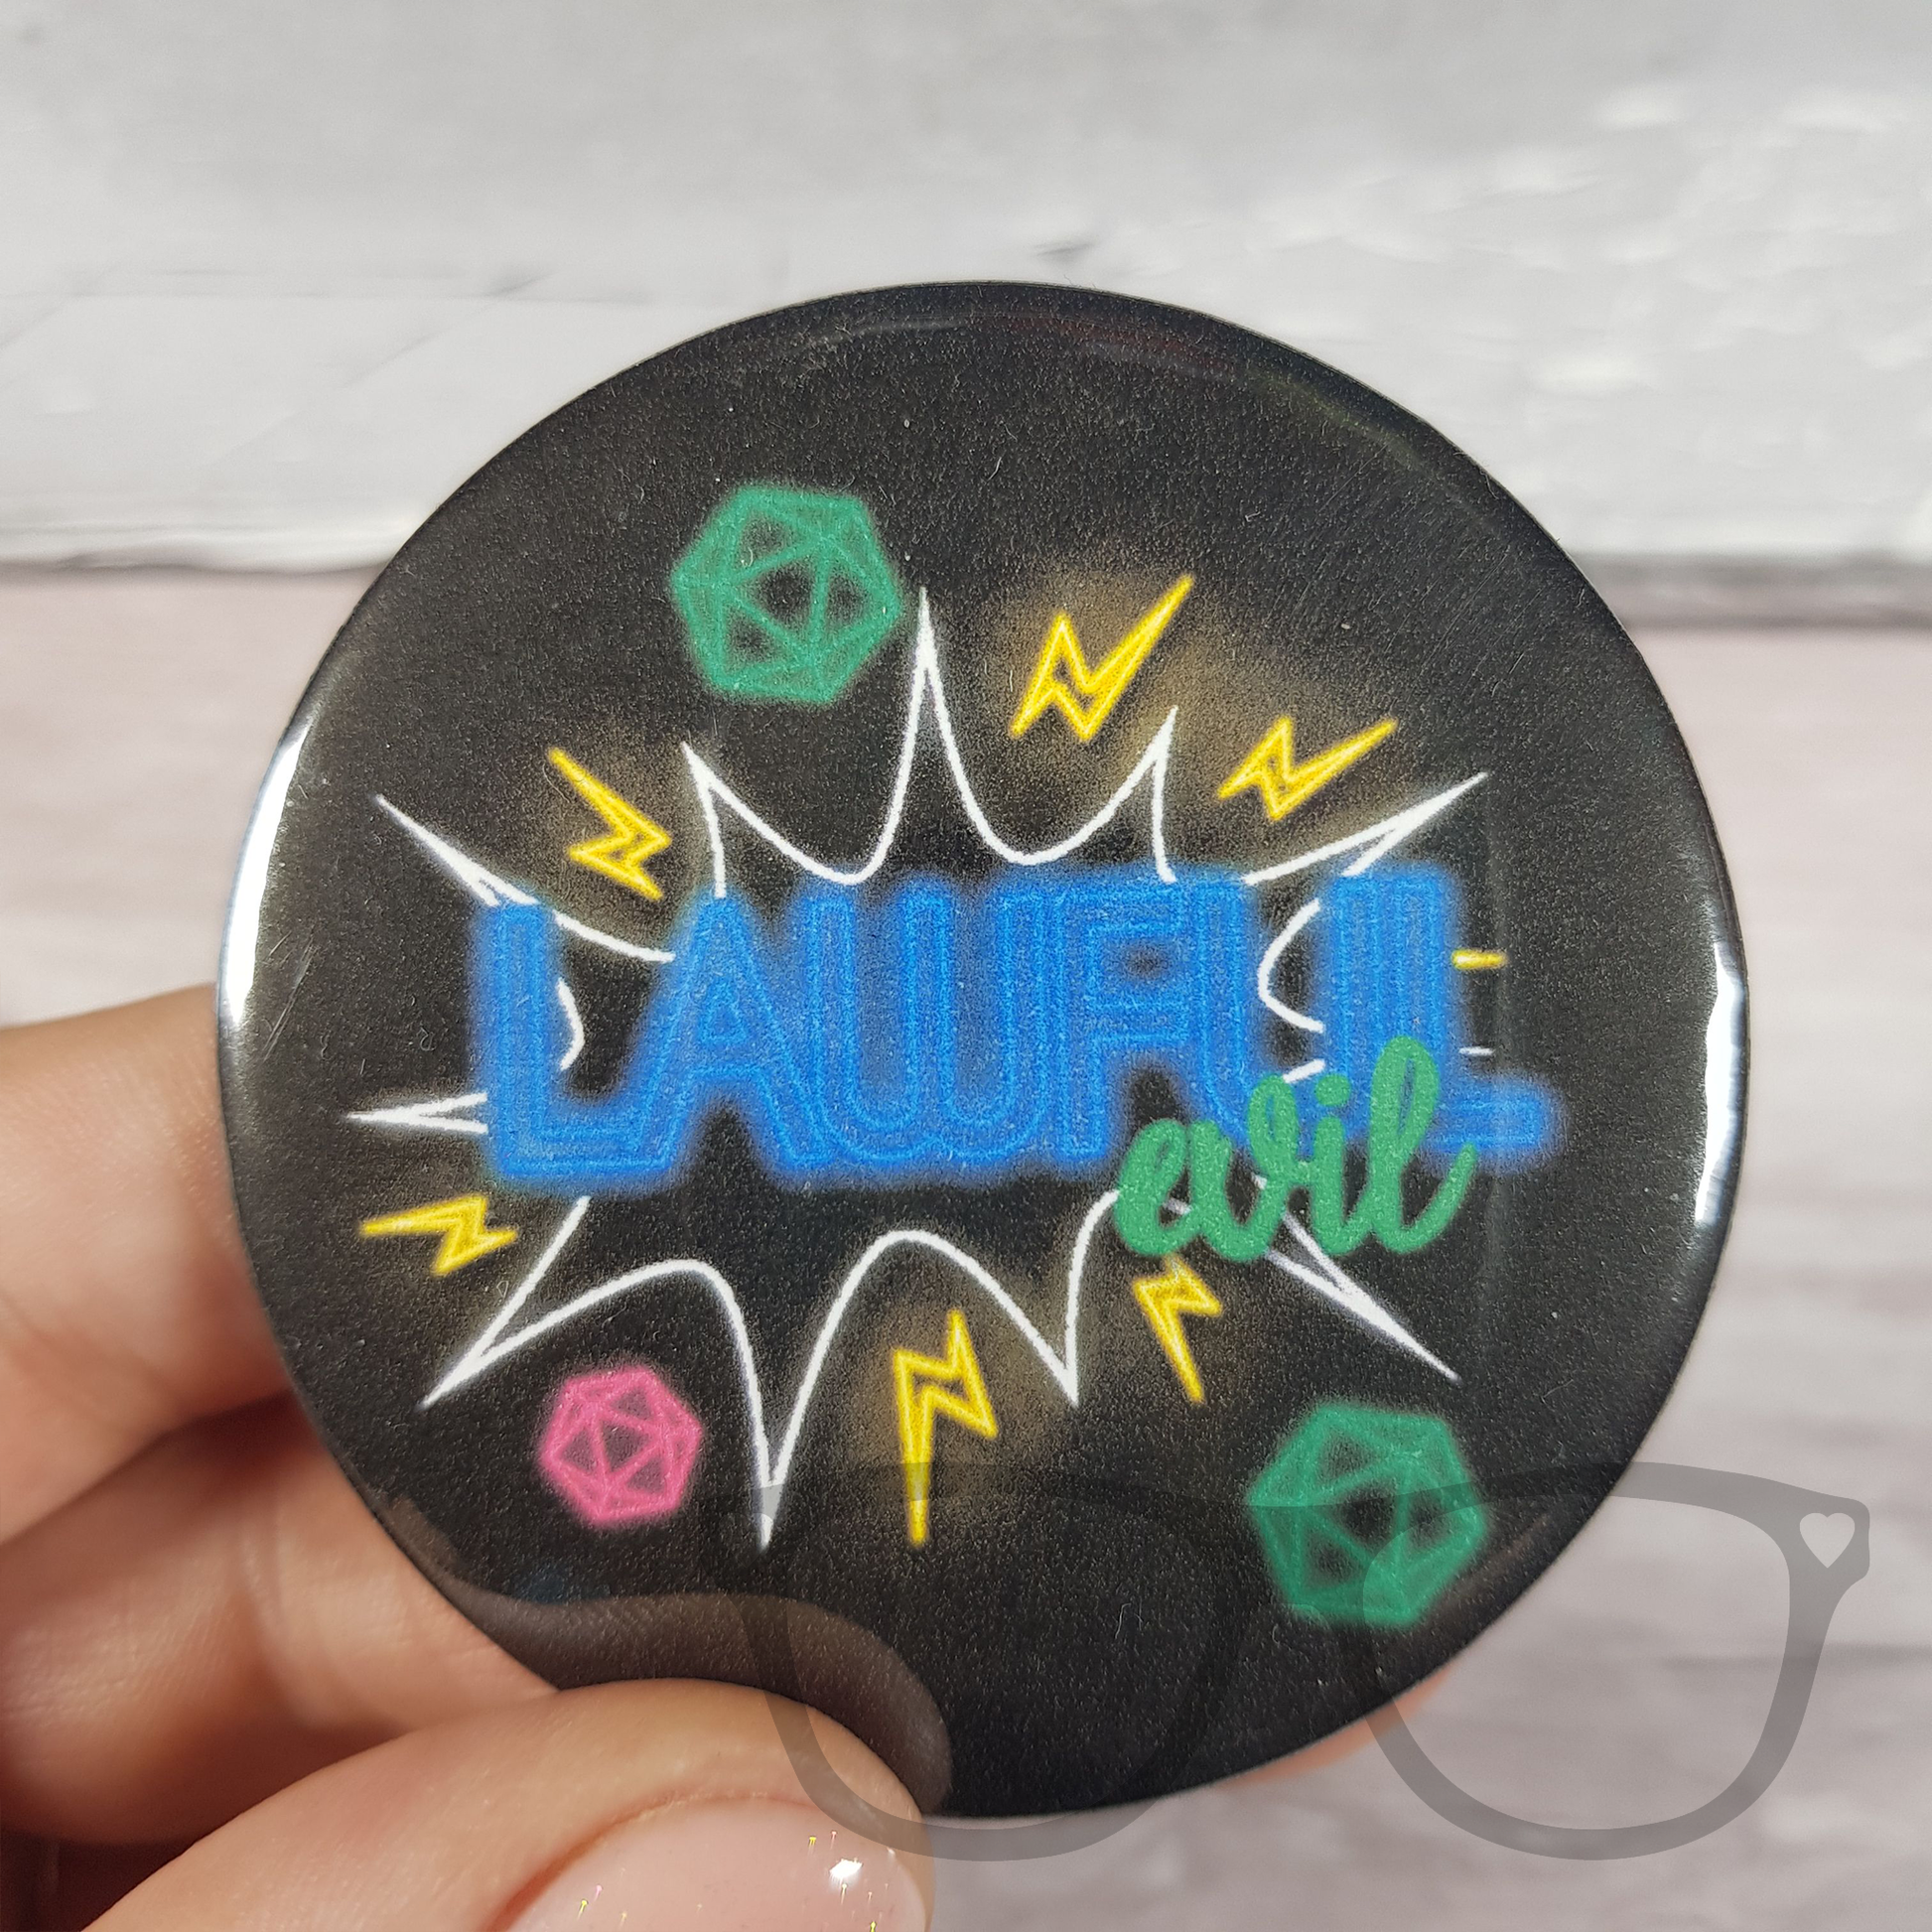 Lawful evil 58mm cyberpunk tabletop alignment badge. Black badge features a colour neon lights style. The words LAWFUL EVIL surrounded by dice and lightening bolts